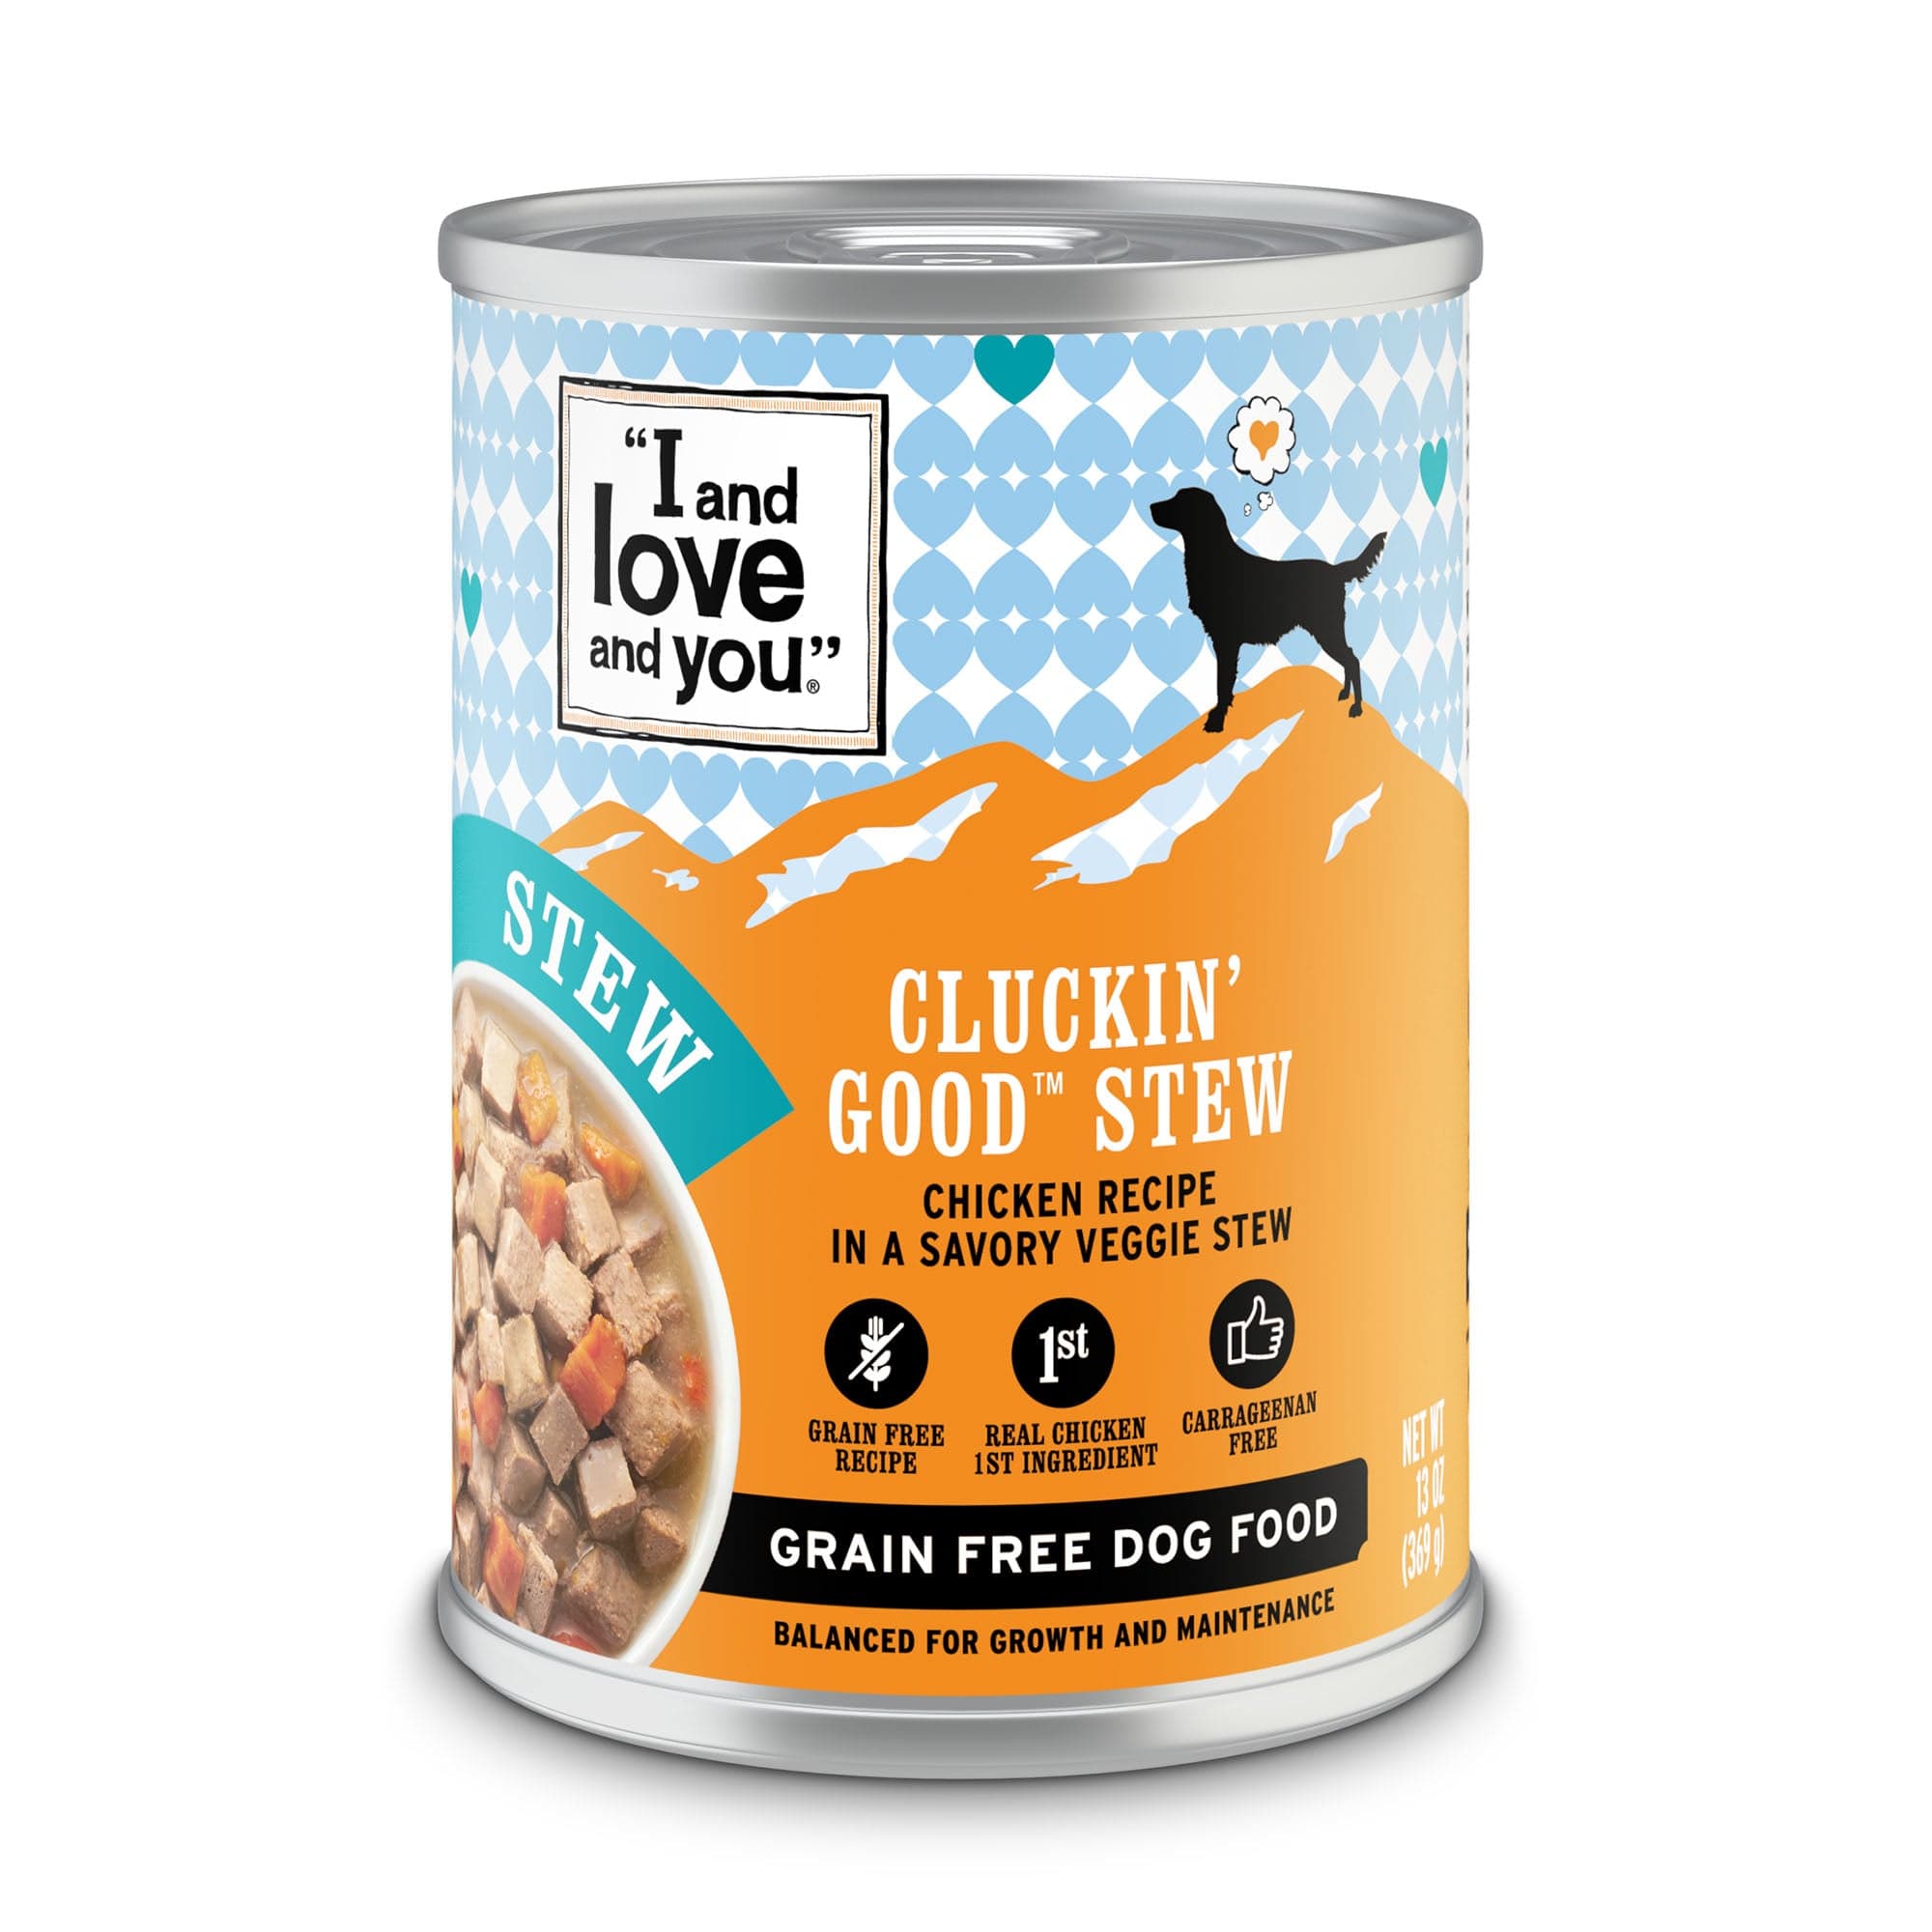 Cluckin' Good Stew canned wet food for dogs with a label.